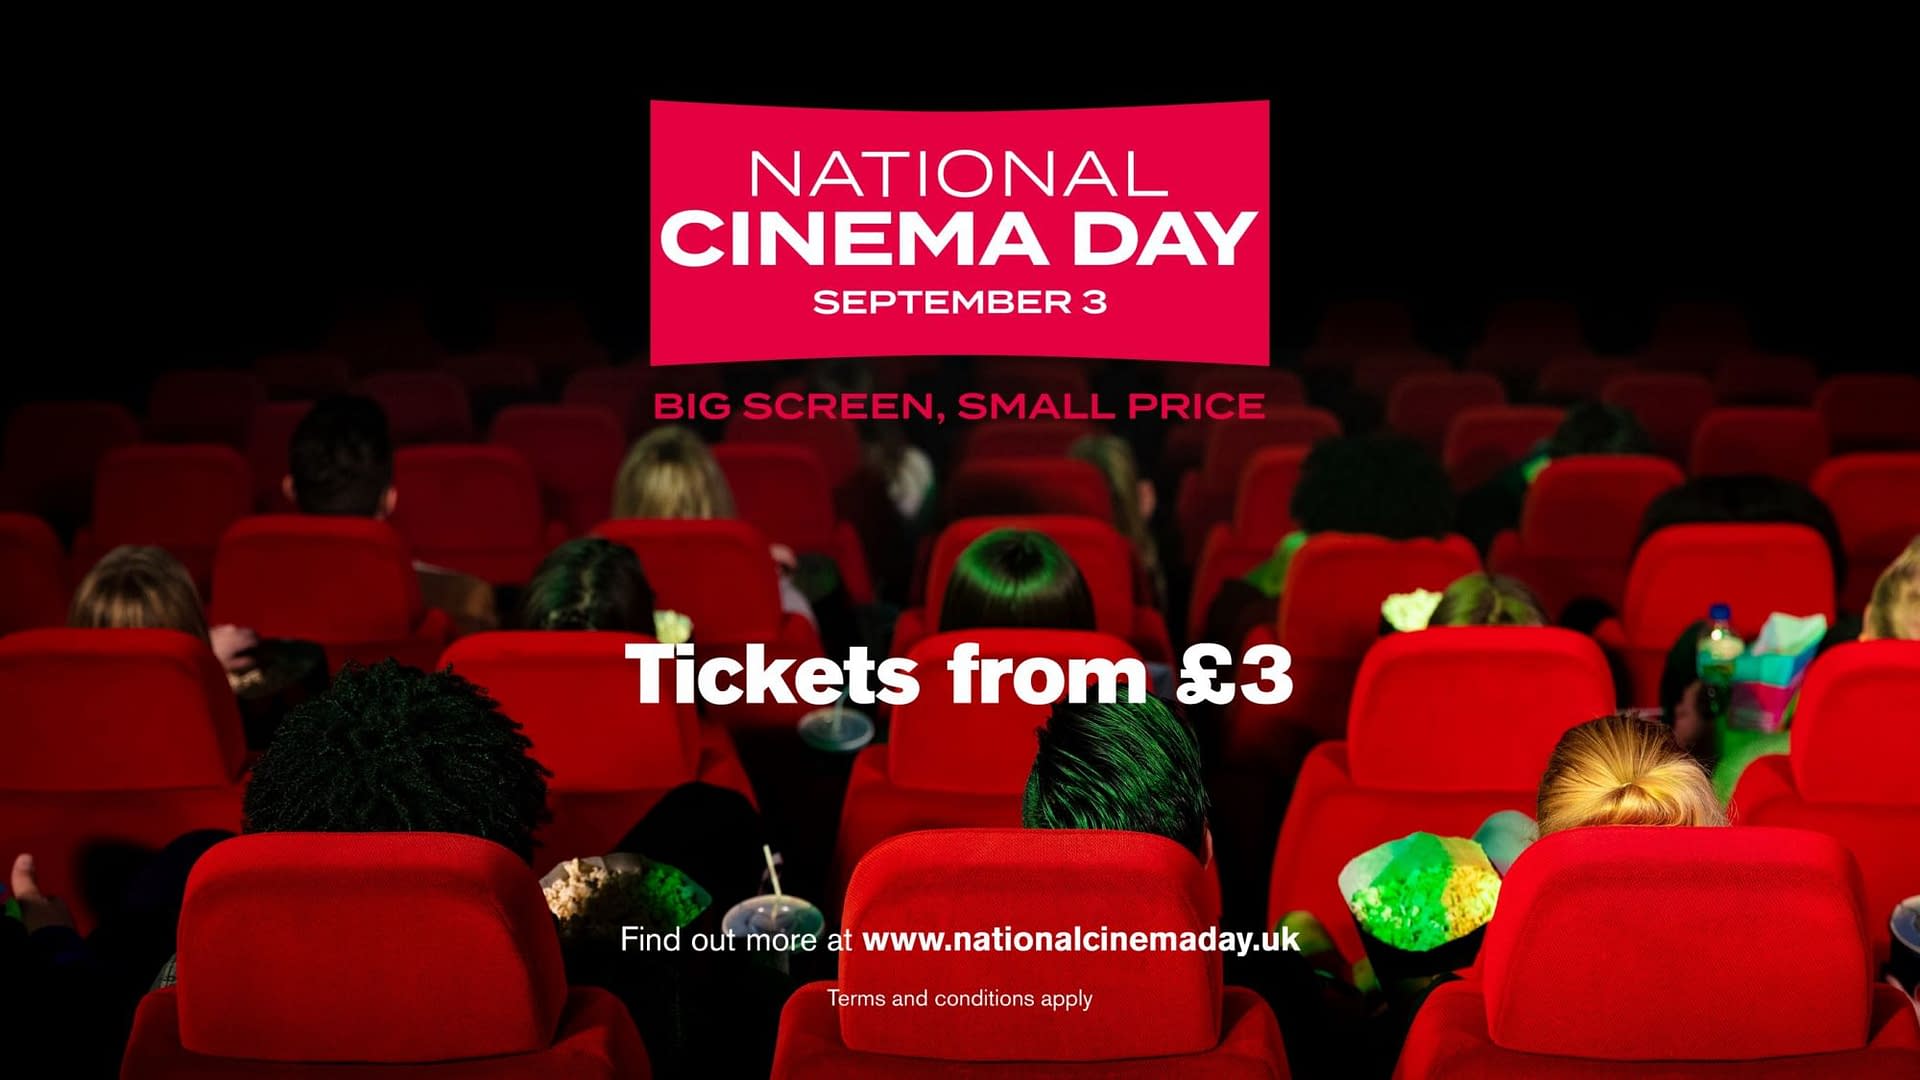 £3 UK Movie Tickets on the 3rd of September, National Cinema Day